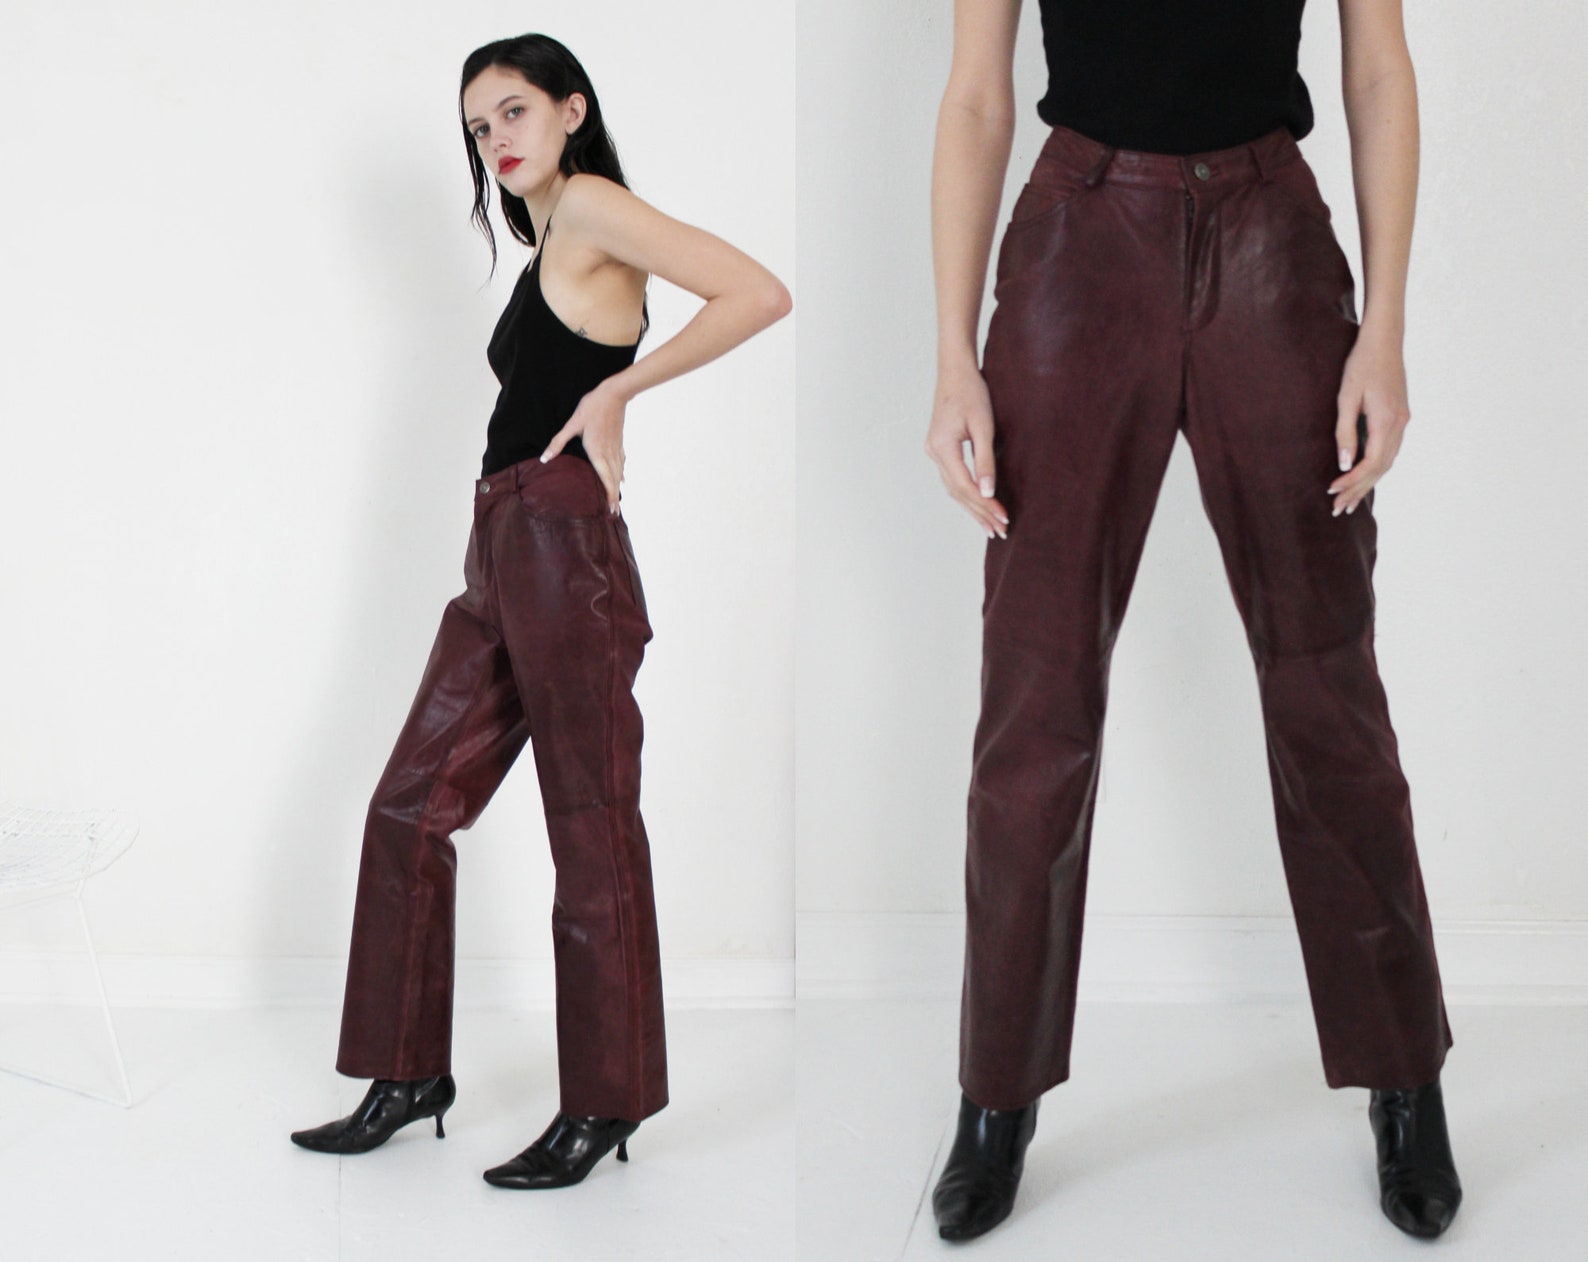 Oxblood distressed leather high rise pants W 26 27 | Etsy